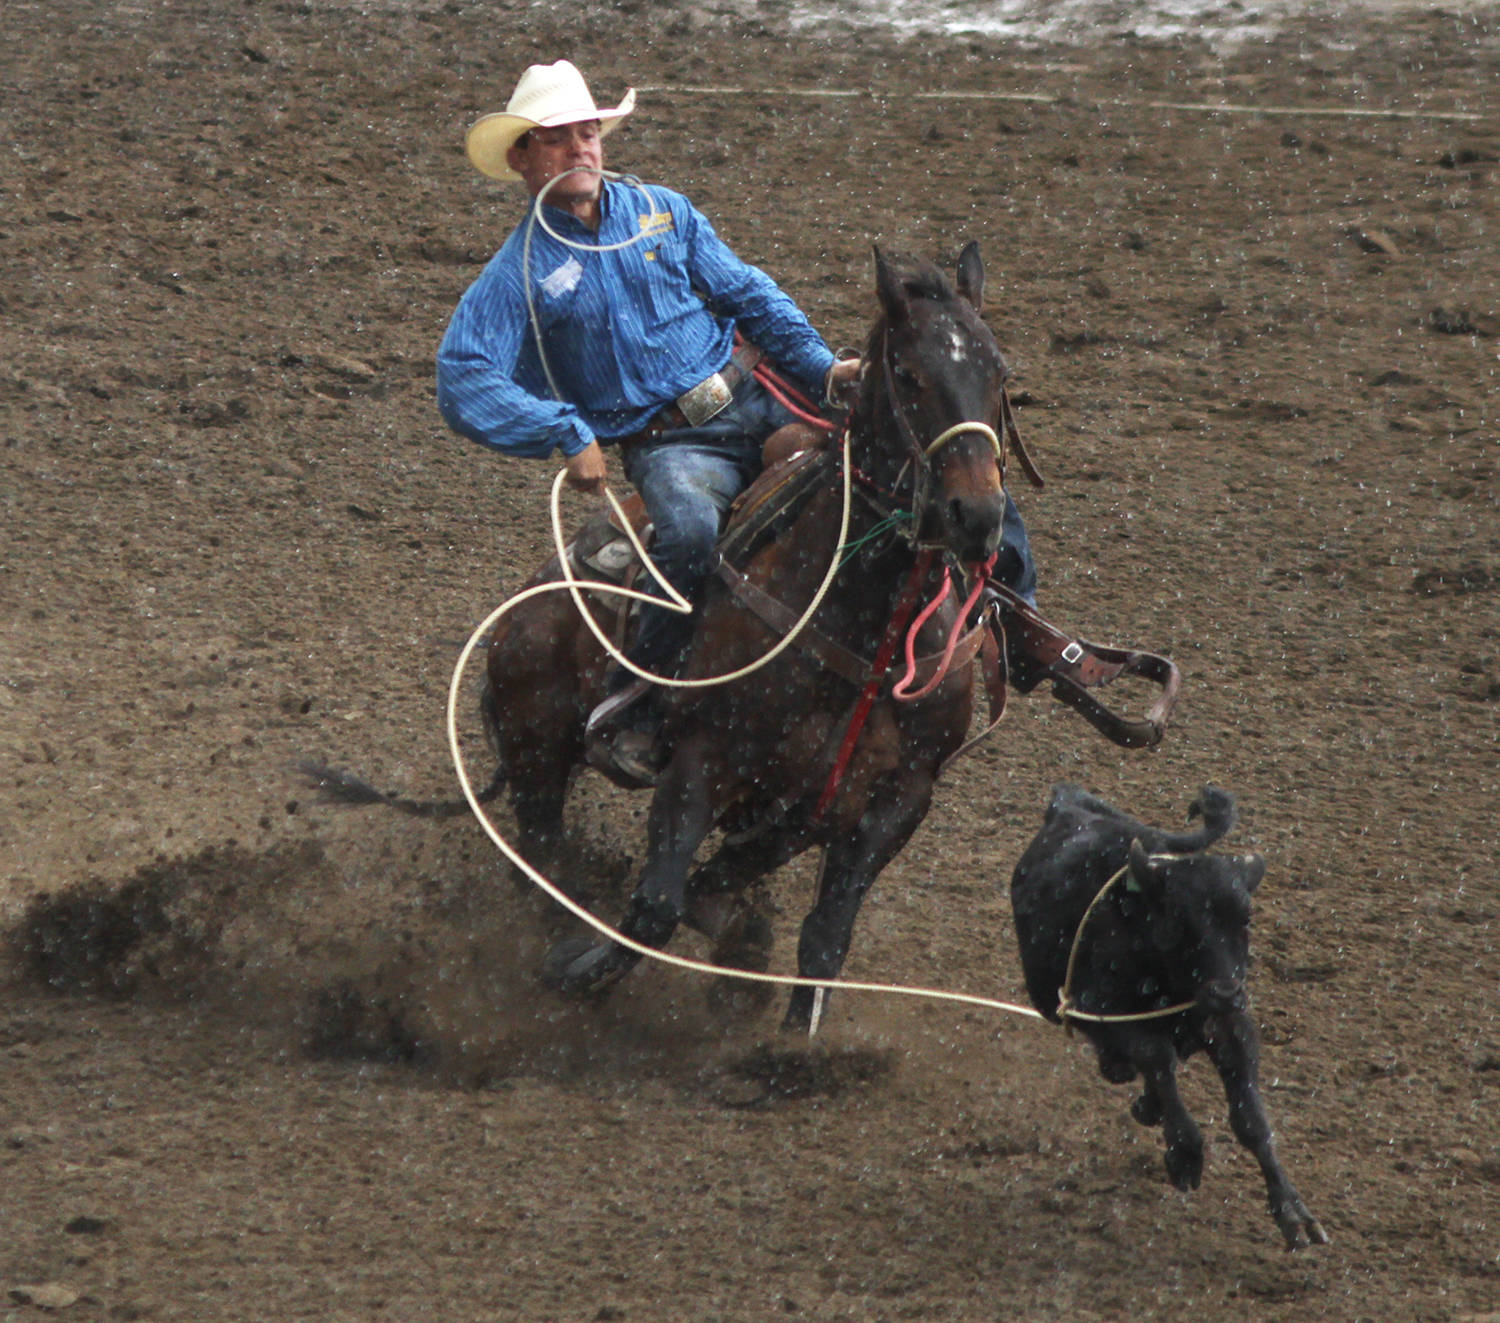 Ponoka’s Keely Bonnett makes a 9.2 second catch during Ponoka Stampede’s Friday steer wrestling event. Bonnett’s ride was good enough to land him in the fifth spot in the average, just one spot behind Rimbey’s Dean Edge.